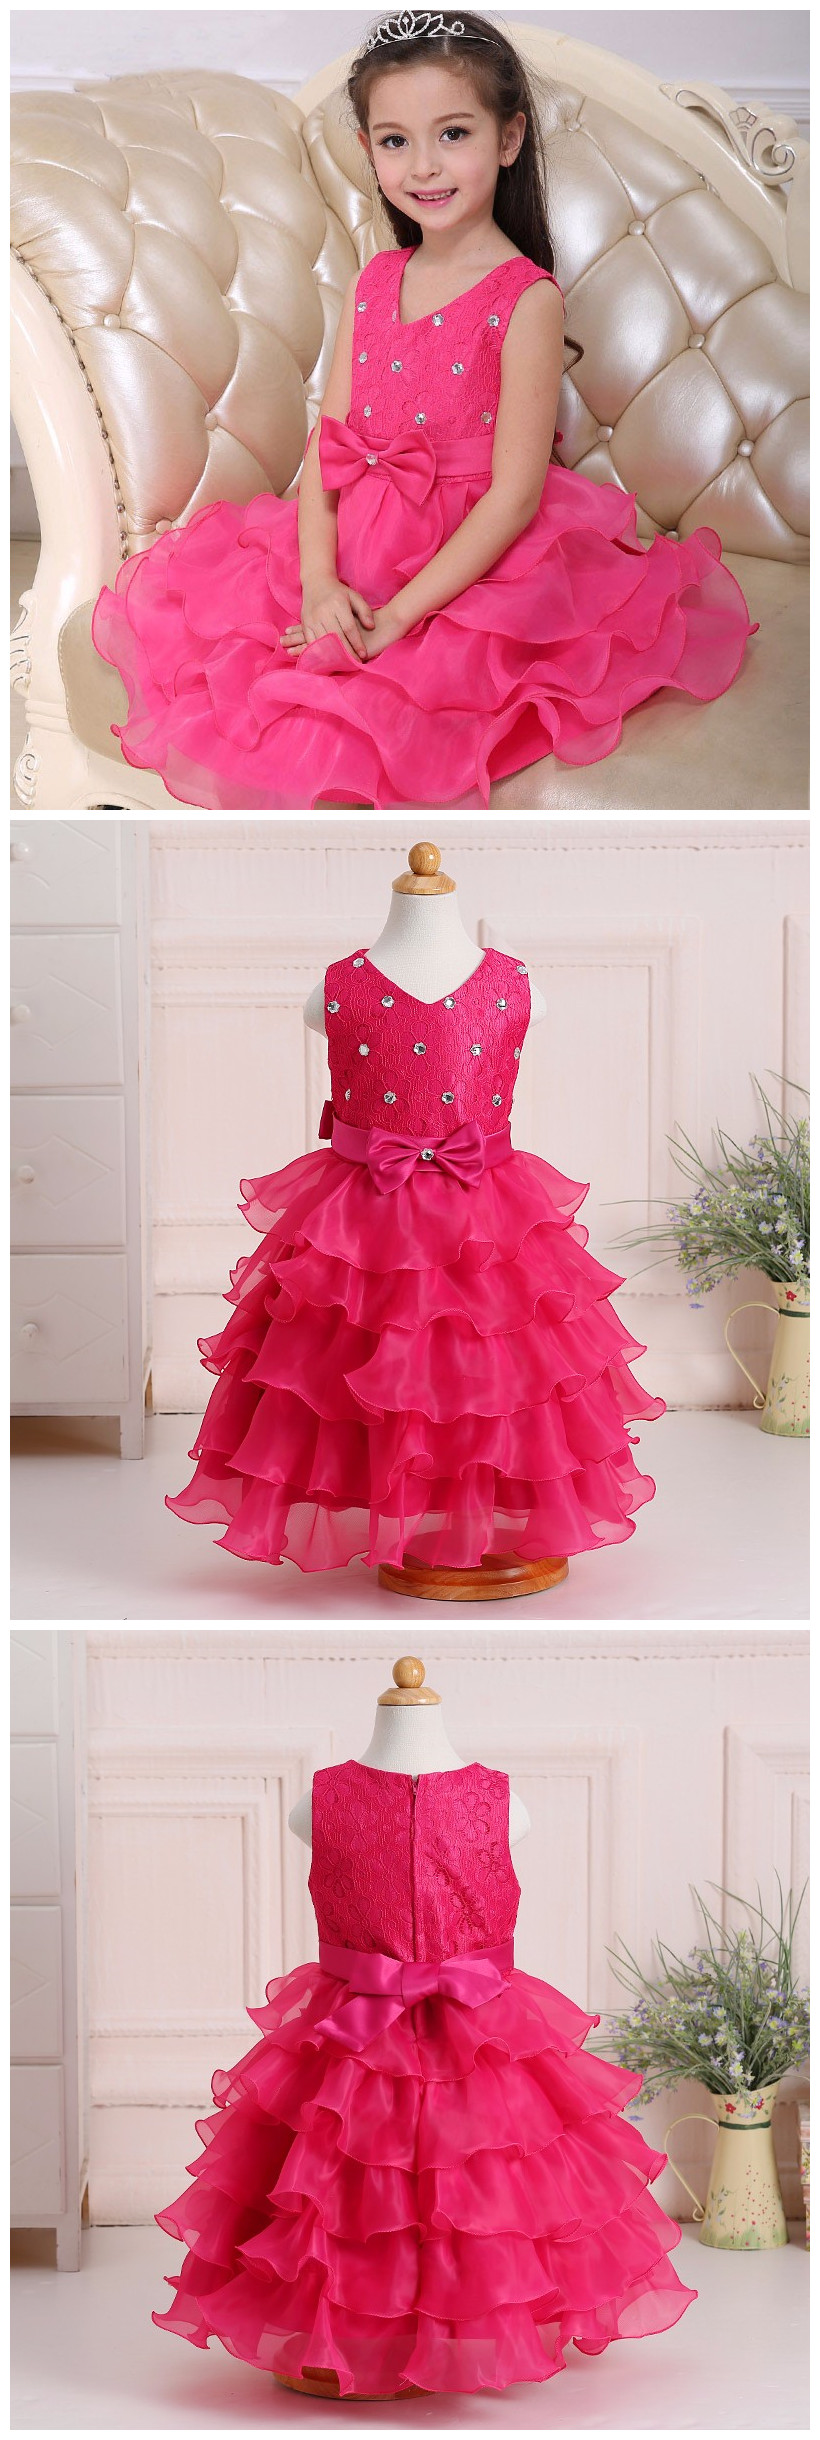 Flower Girl Dresses, Rhinestones And Bow Decorate Kid Girls Wedding Dress Cute Tiered Little Girls Prom Ball Gown